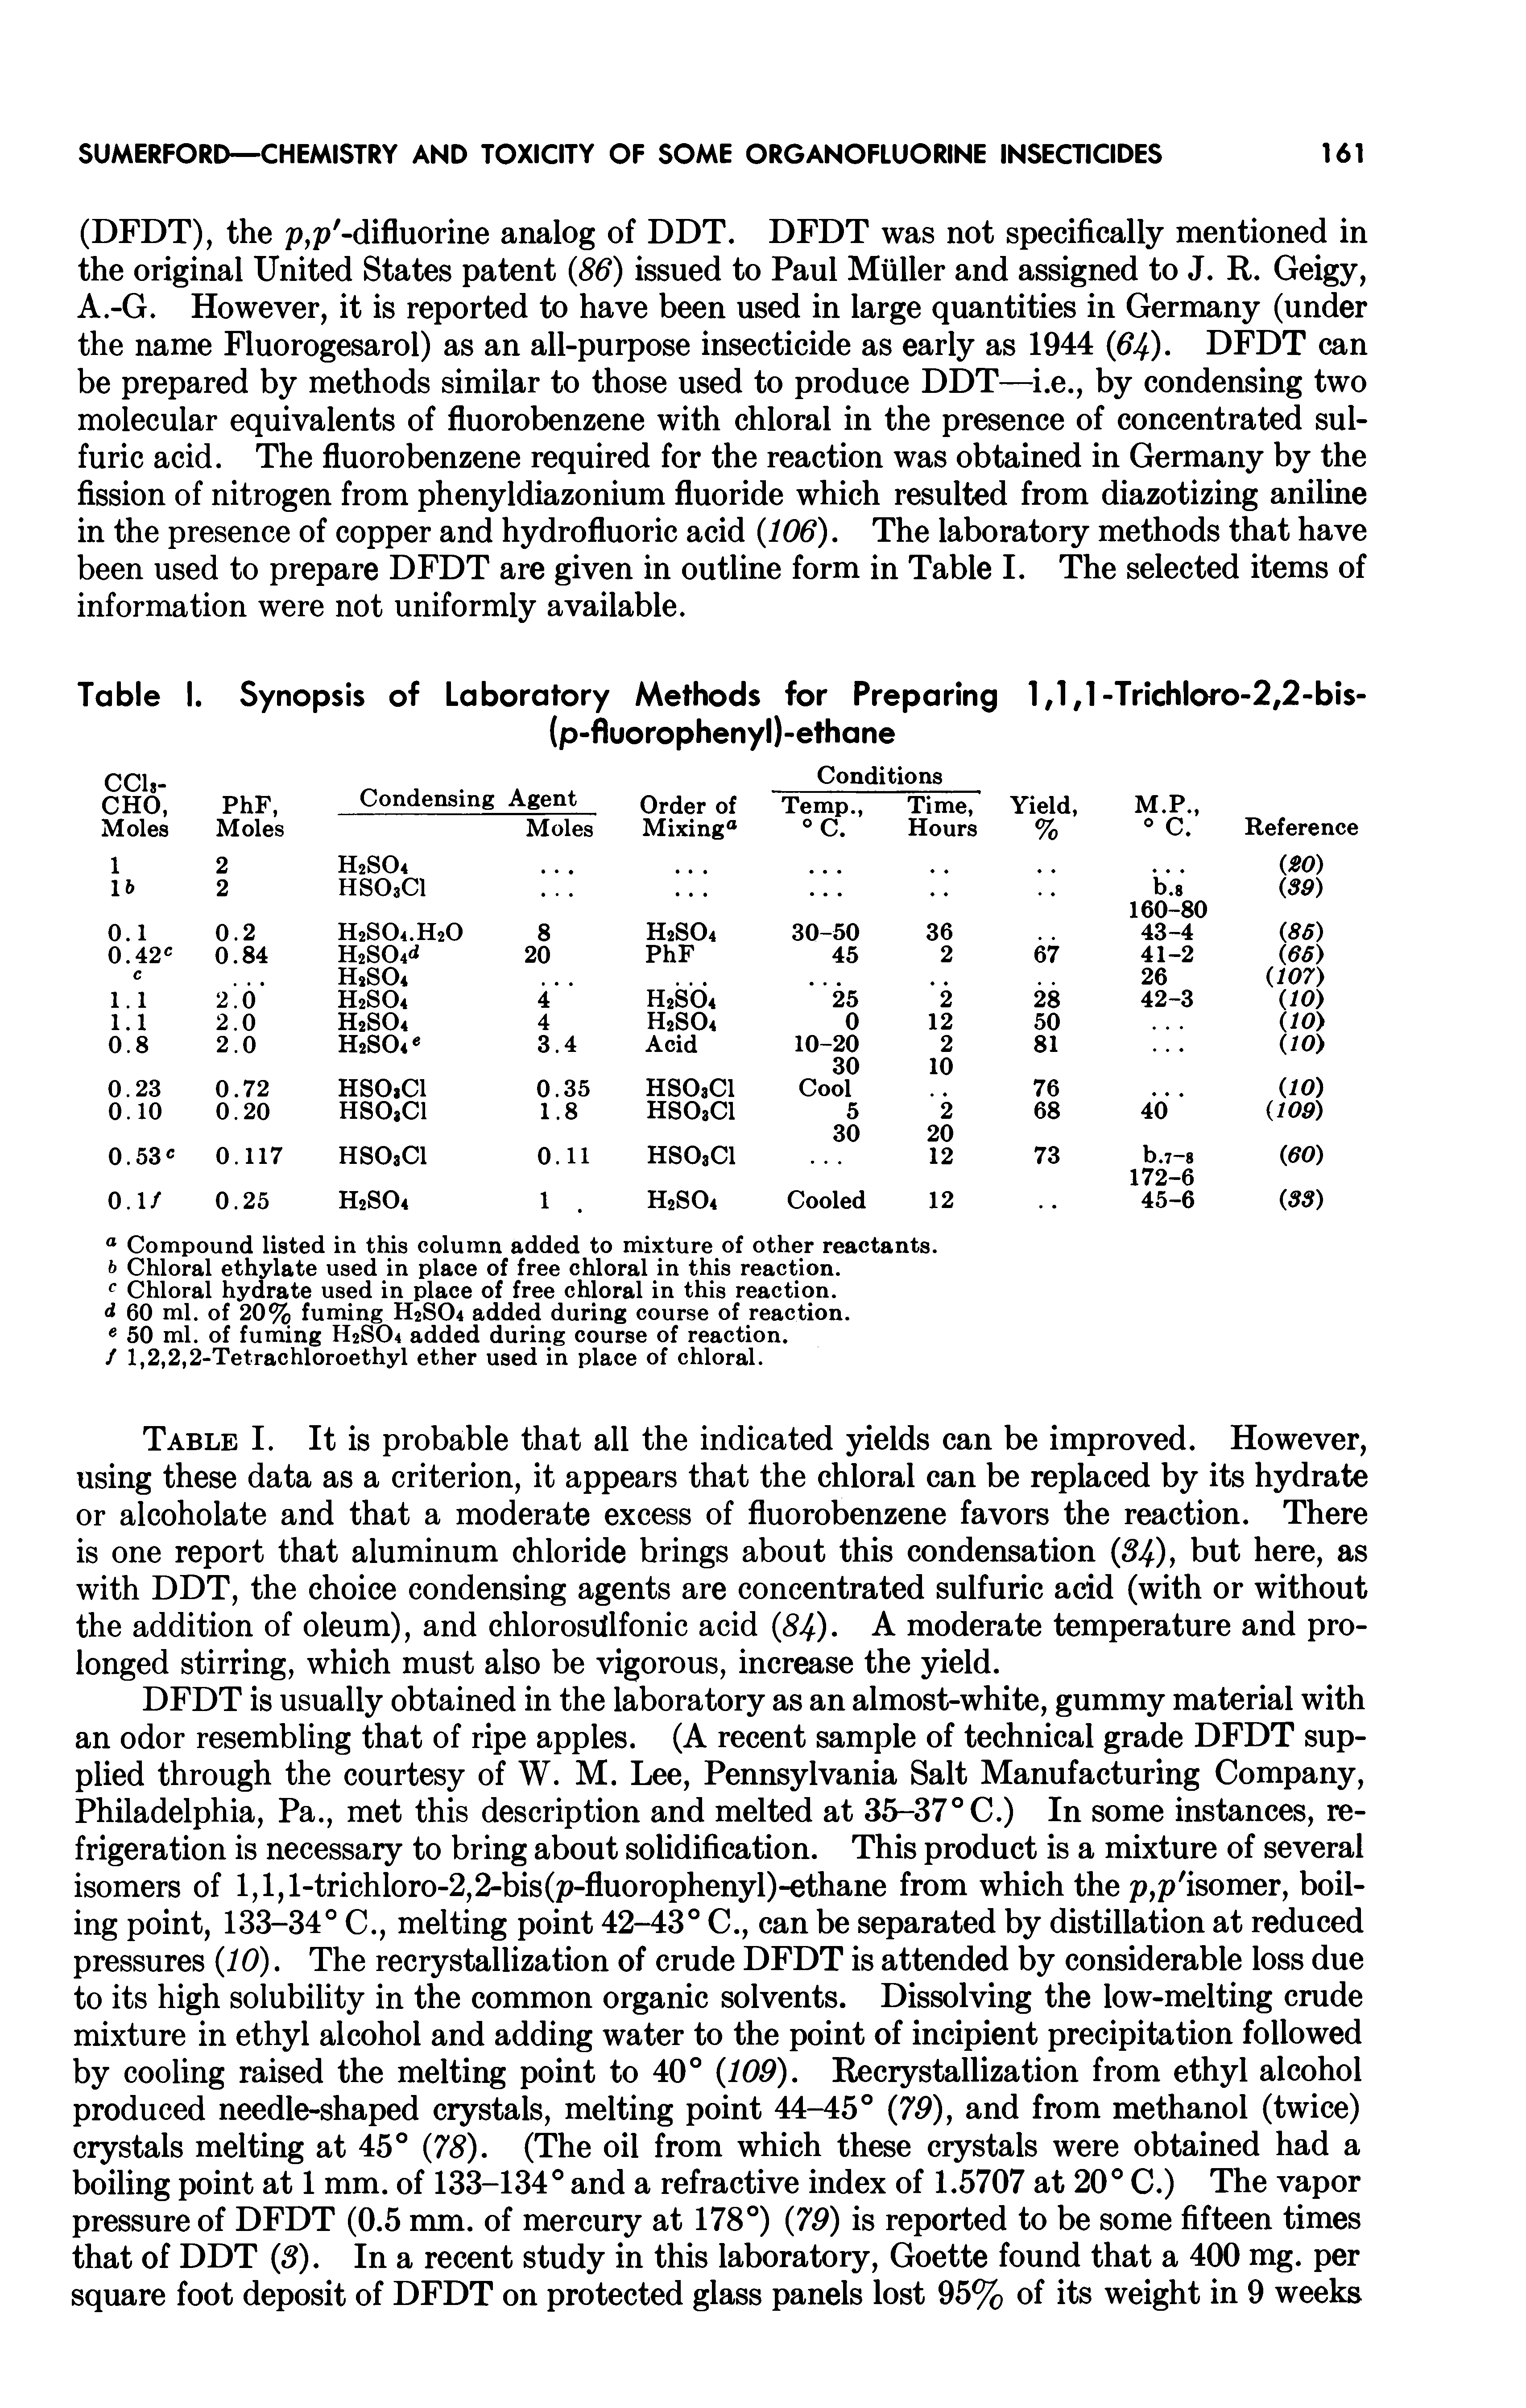 Table I. It is probable that all the indicated yields can be improved. However, using these data as a criterion, it appears that the chloral can be replaced by its hydrate or alcoholate and that a moderate excess of fluorobenzene favors the reaction. There is one report that aluminum chloride brings about this condensation (34), but here, as with DDT, the choice condensing agents are concentrated sulfuric acid (with or without the addition of oleum), and chlorostflfonic acid (84). A moderate temperature and prolonged stirring, which must also be vigorous, increase the yield.